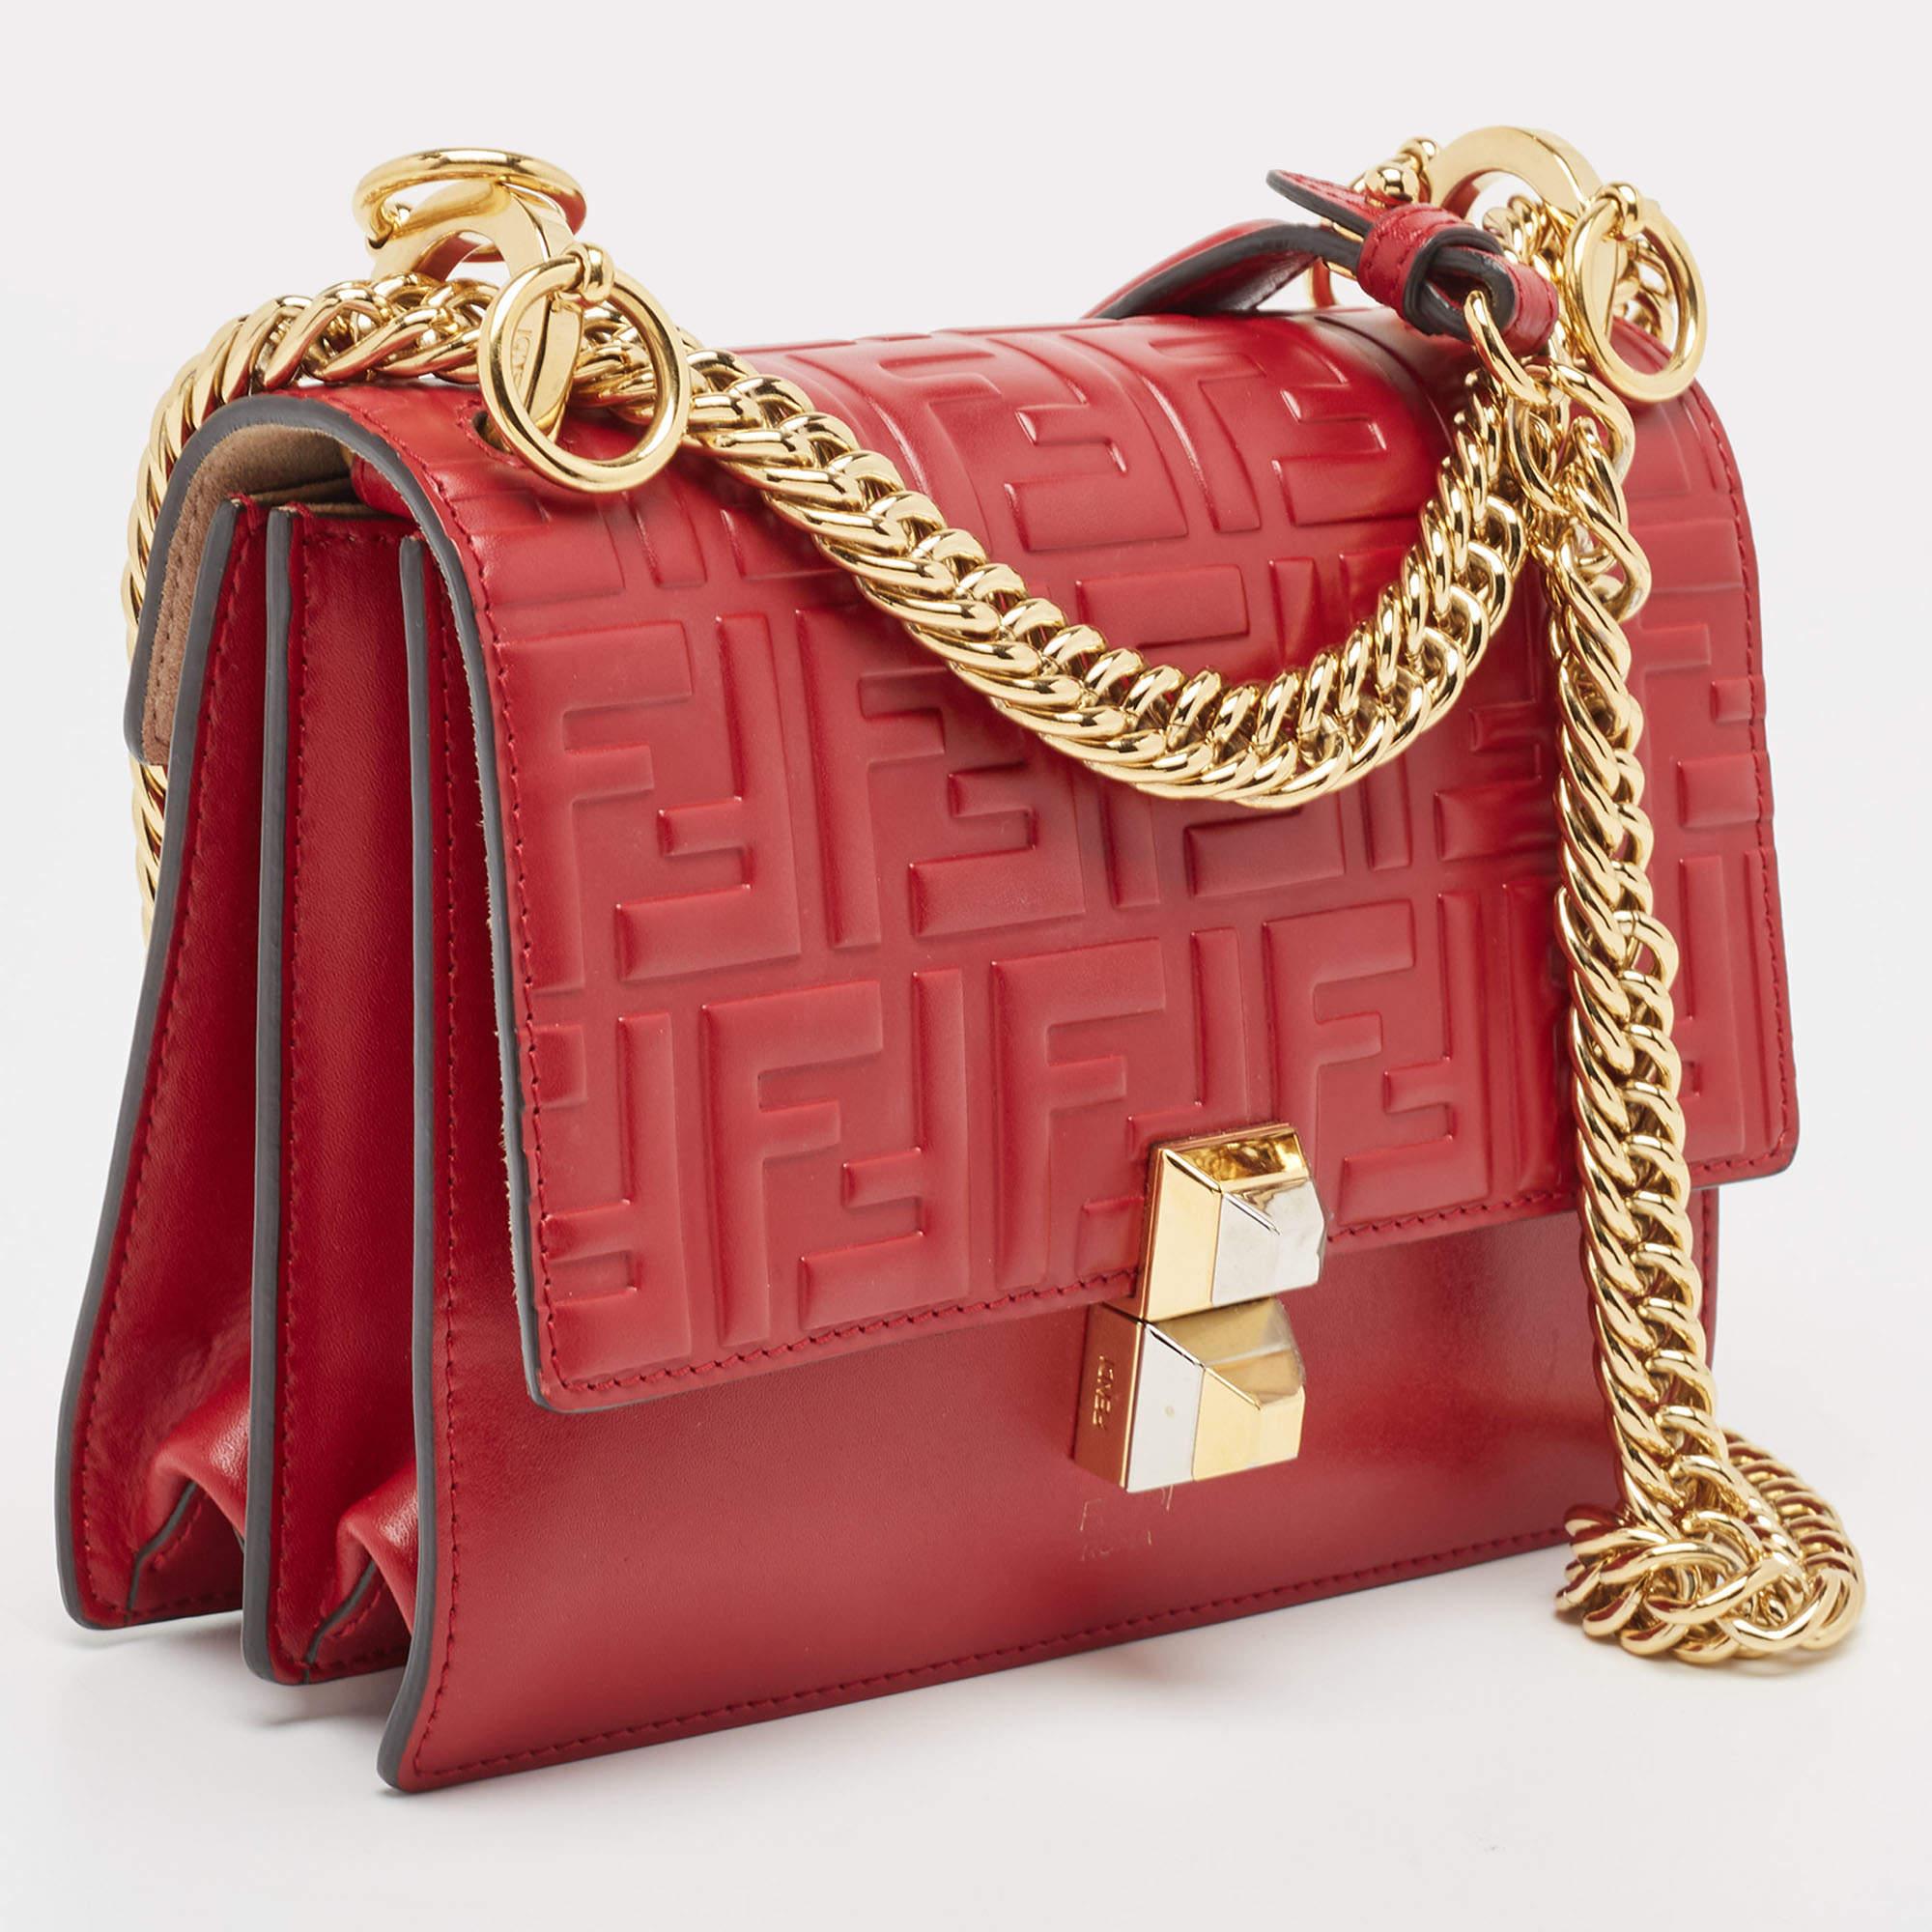 Fendi Red Zucca Embossed Leather Small Kan I Flap Shoulder Bag In Good Condition For Sale In Dubai, Al Qouz 2